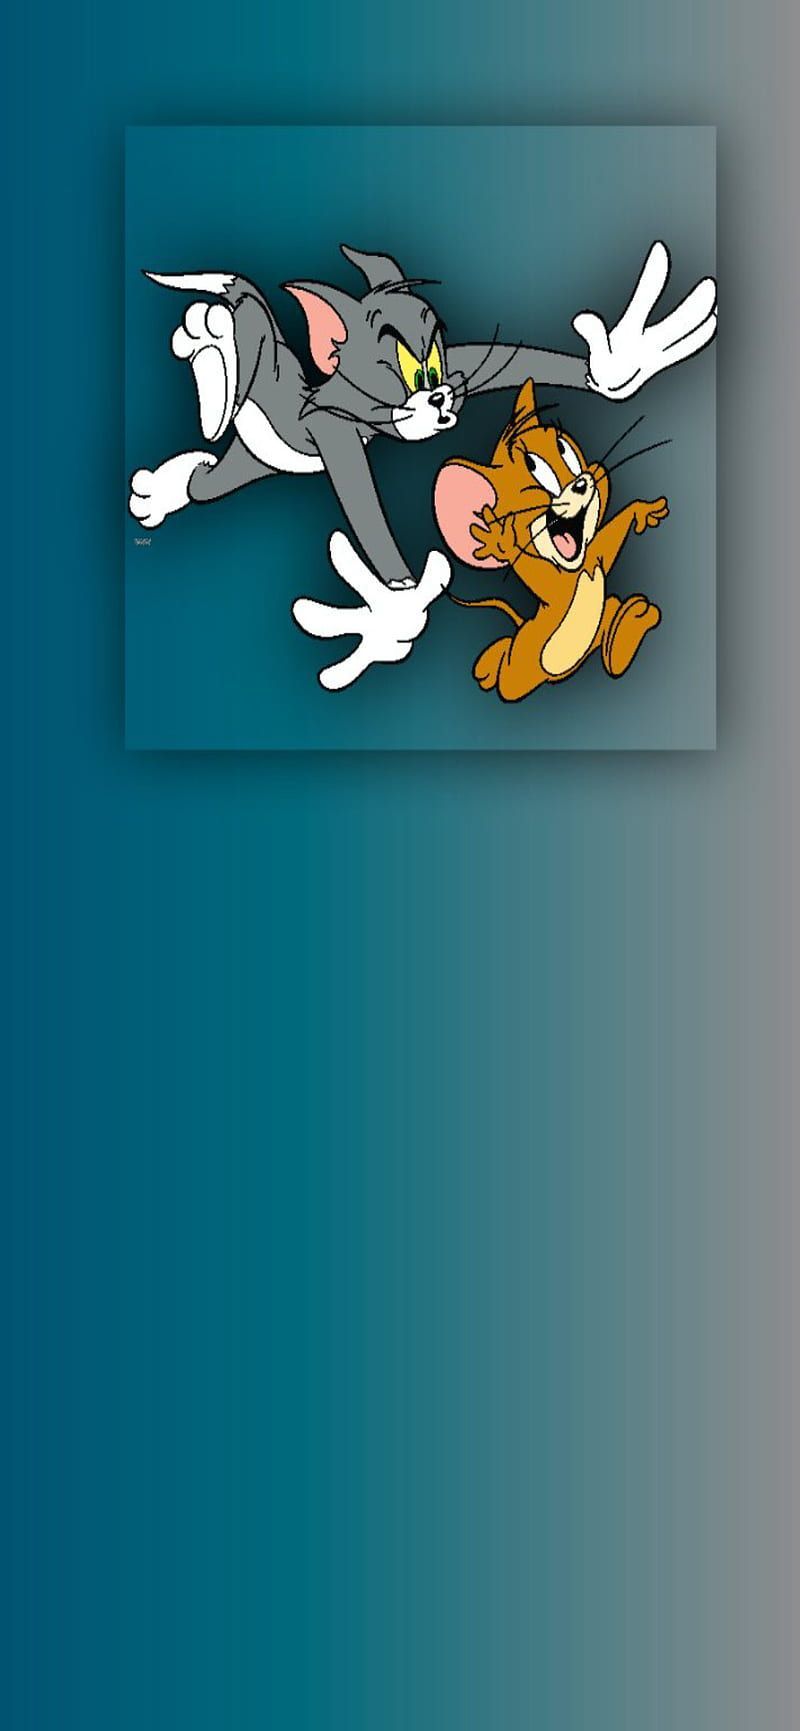 Tom and Jerry wallpaper for android phone and tablet - Tom and Jerry